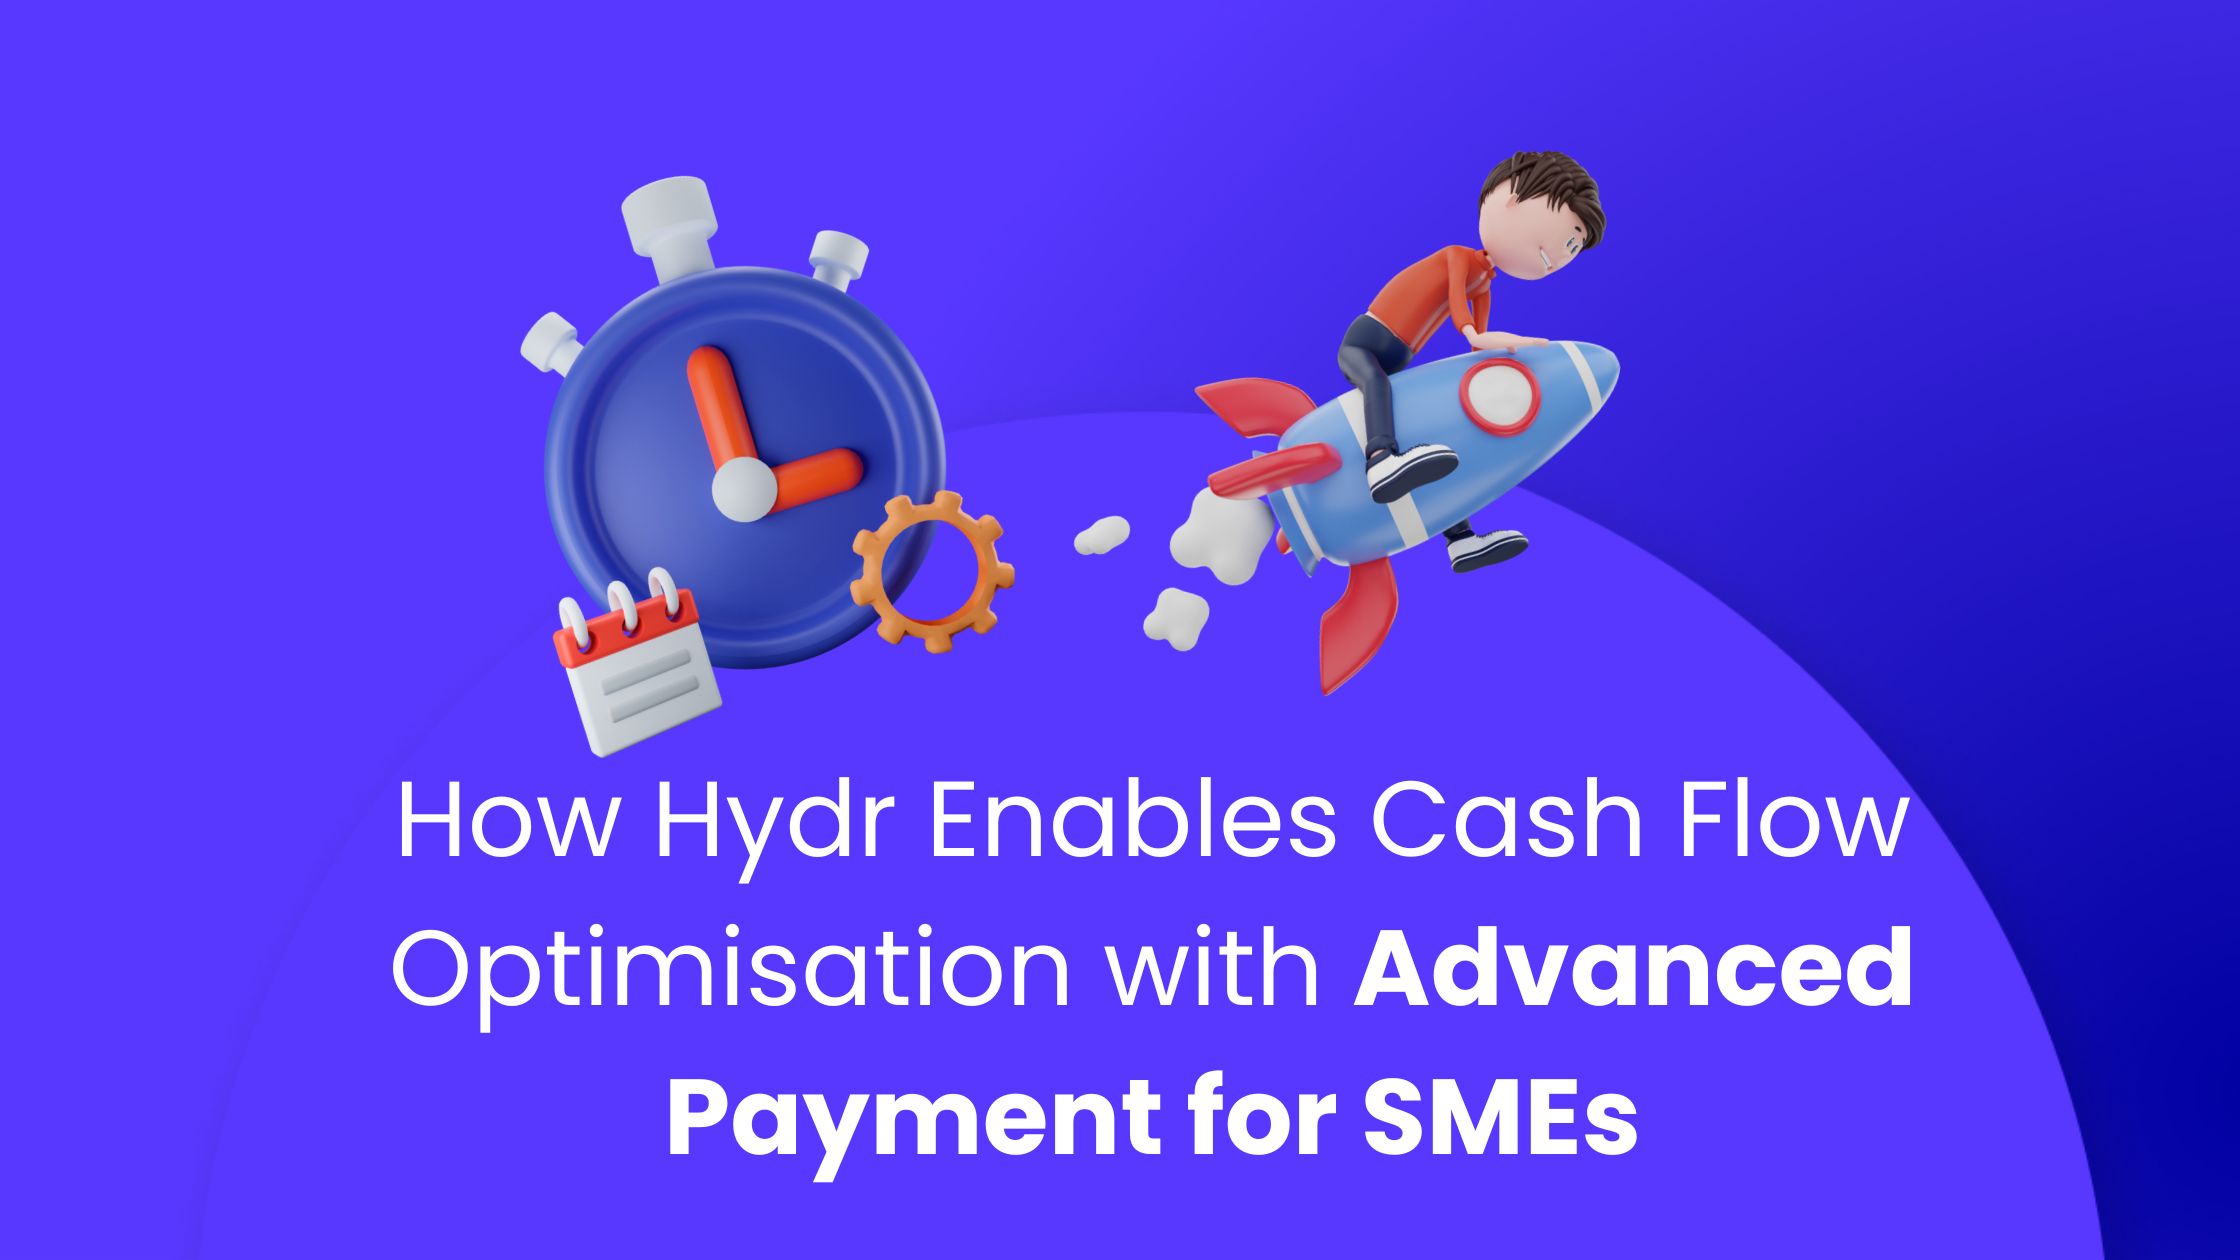 Enabling and Optimising Cash Flow with Hydr - Blog